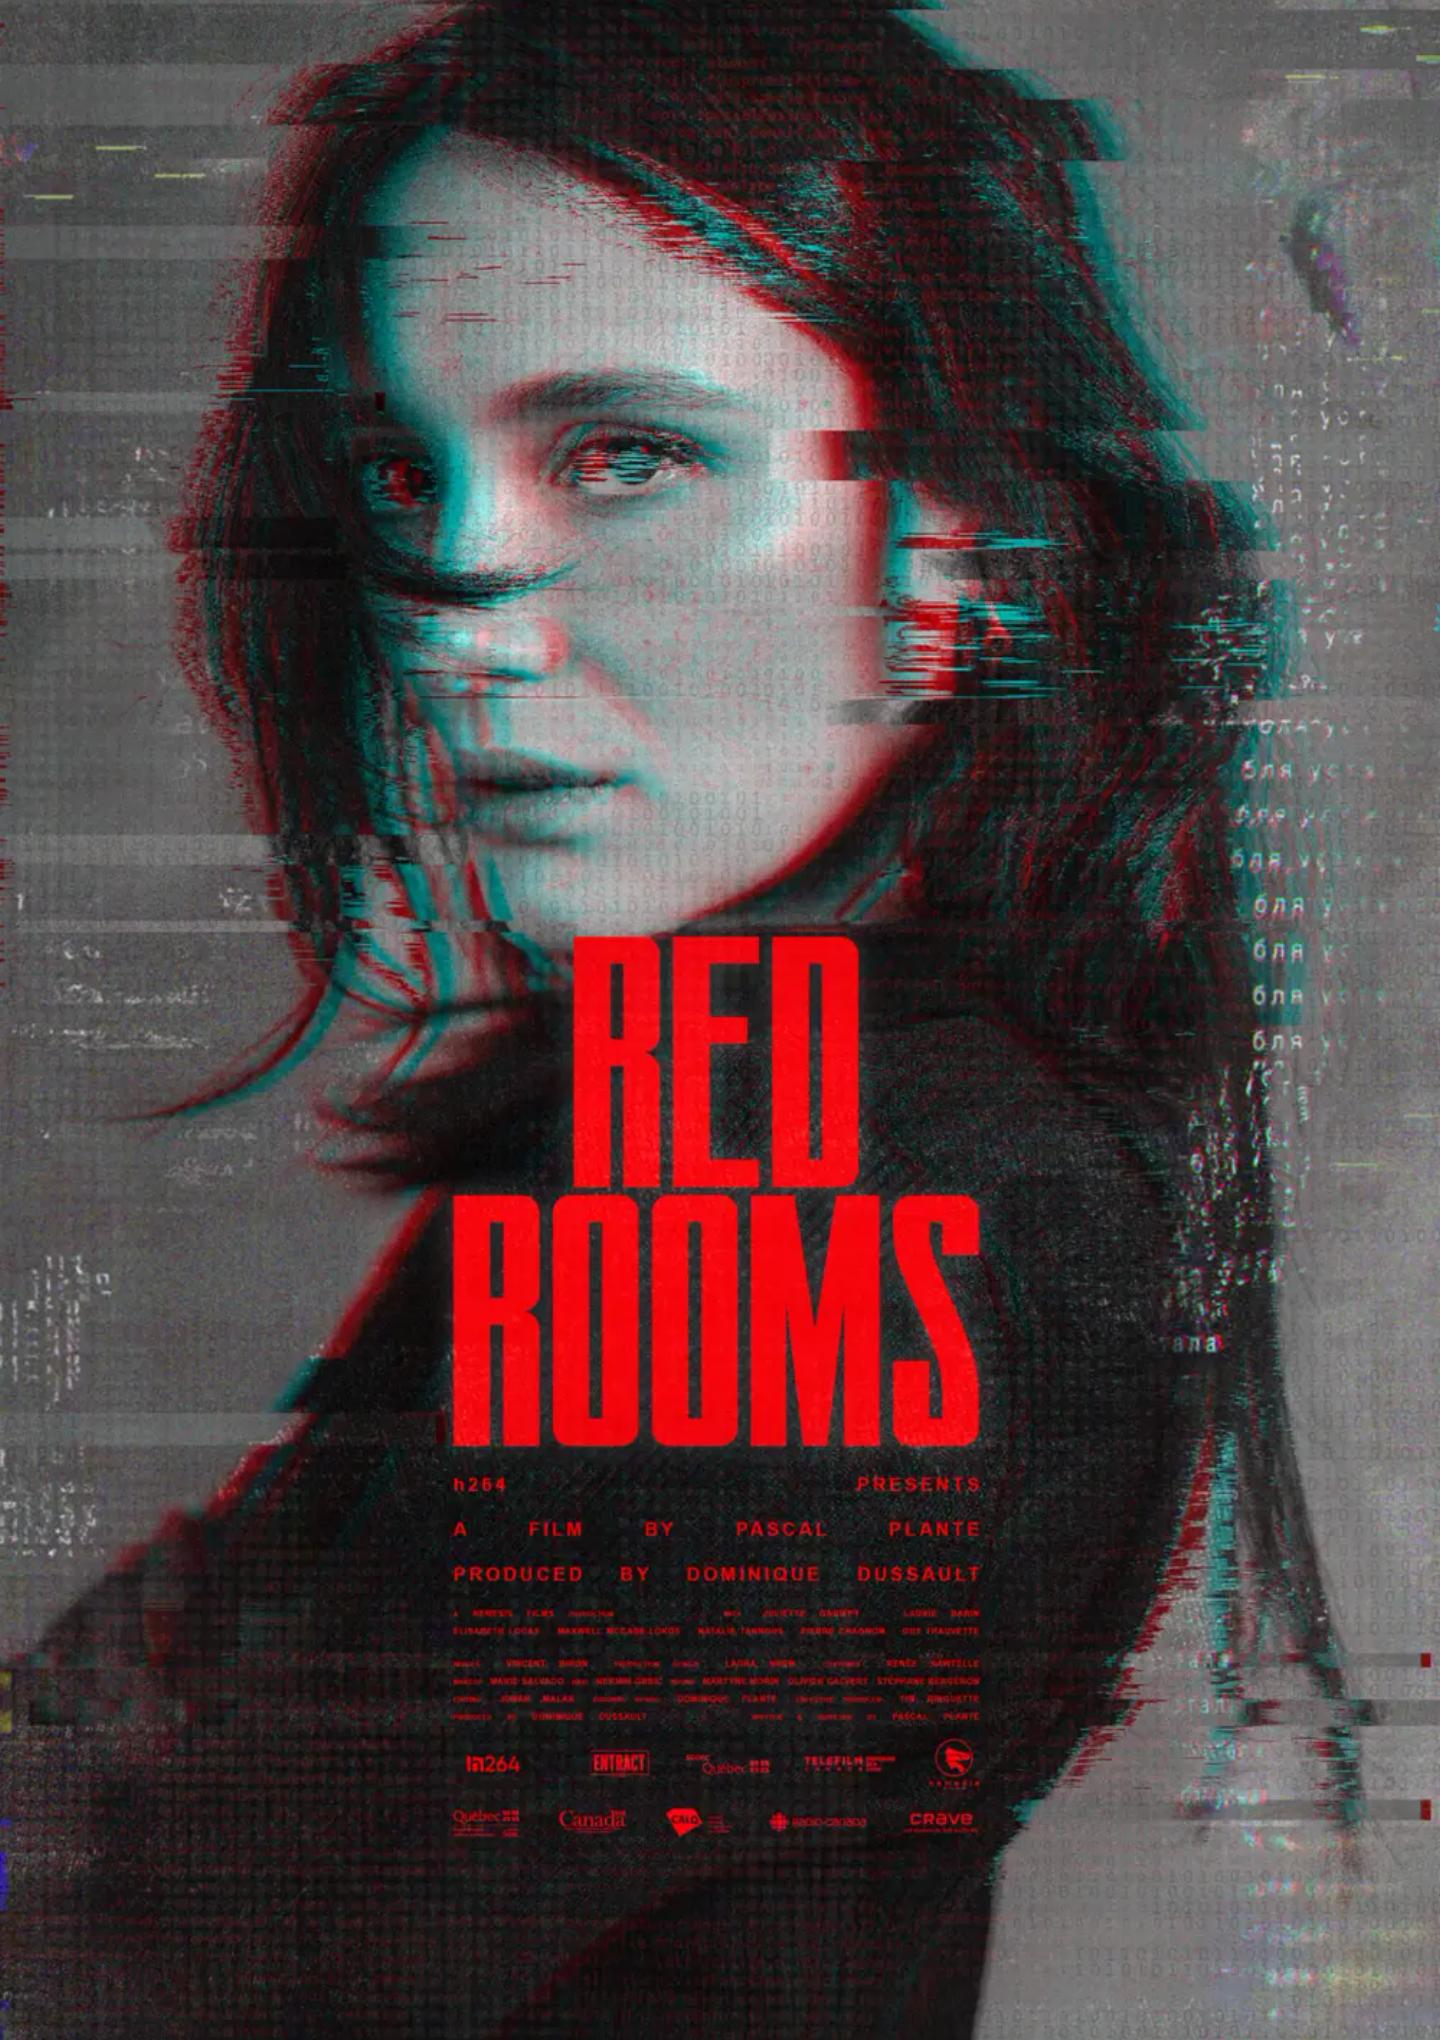 Plakat for 'Red Rooms'